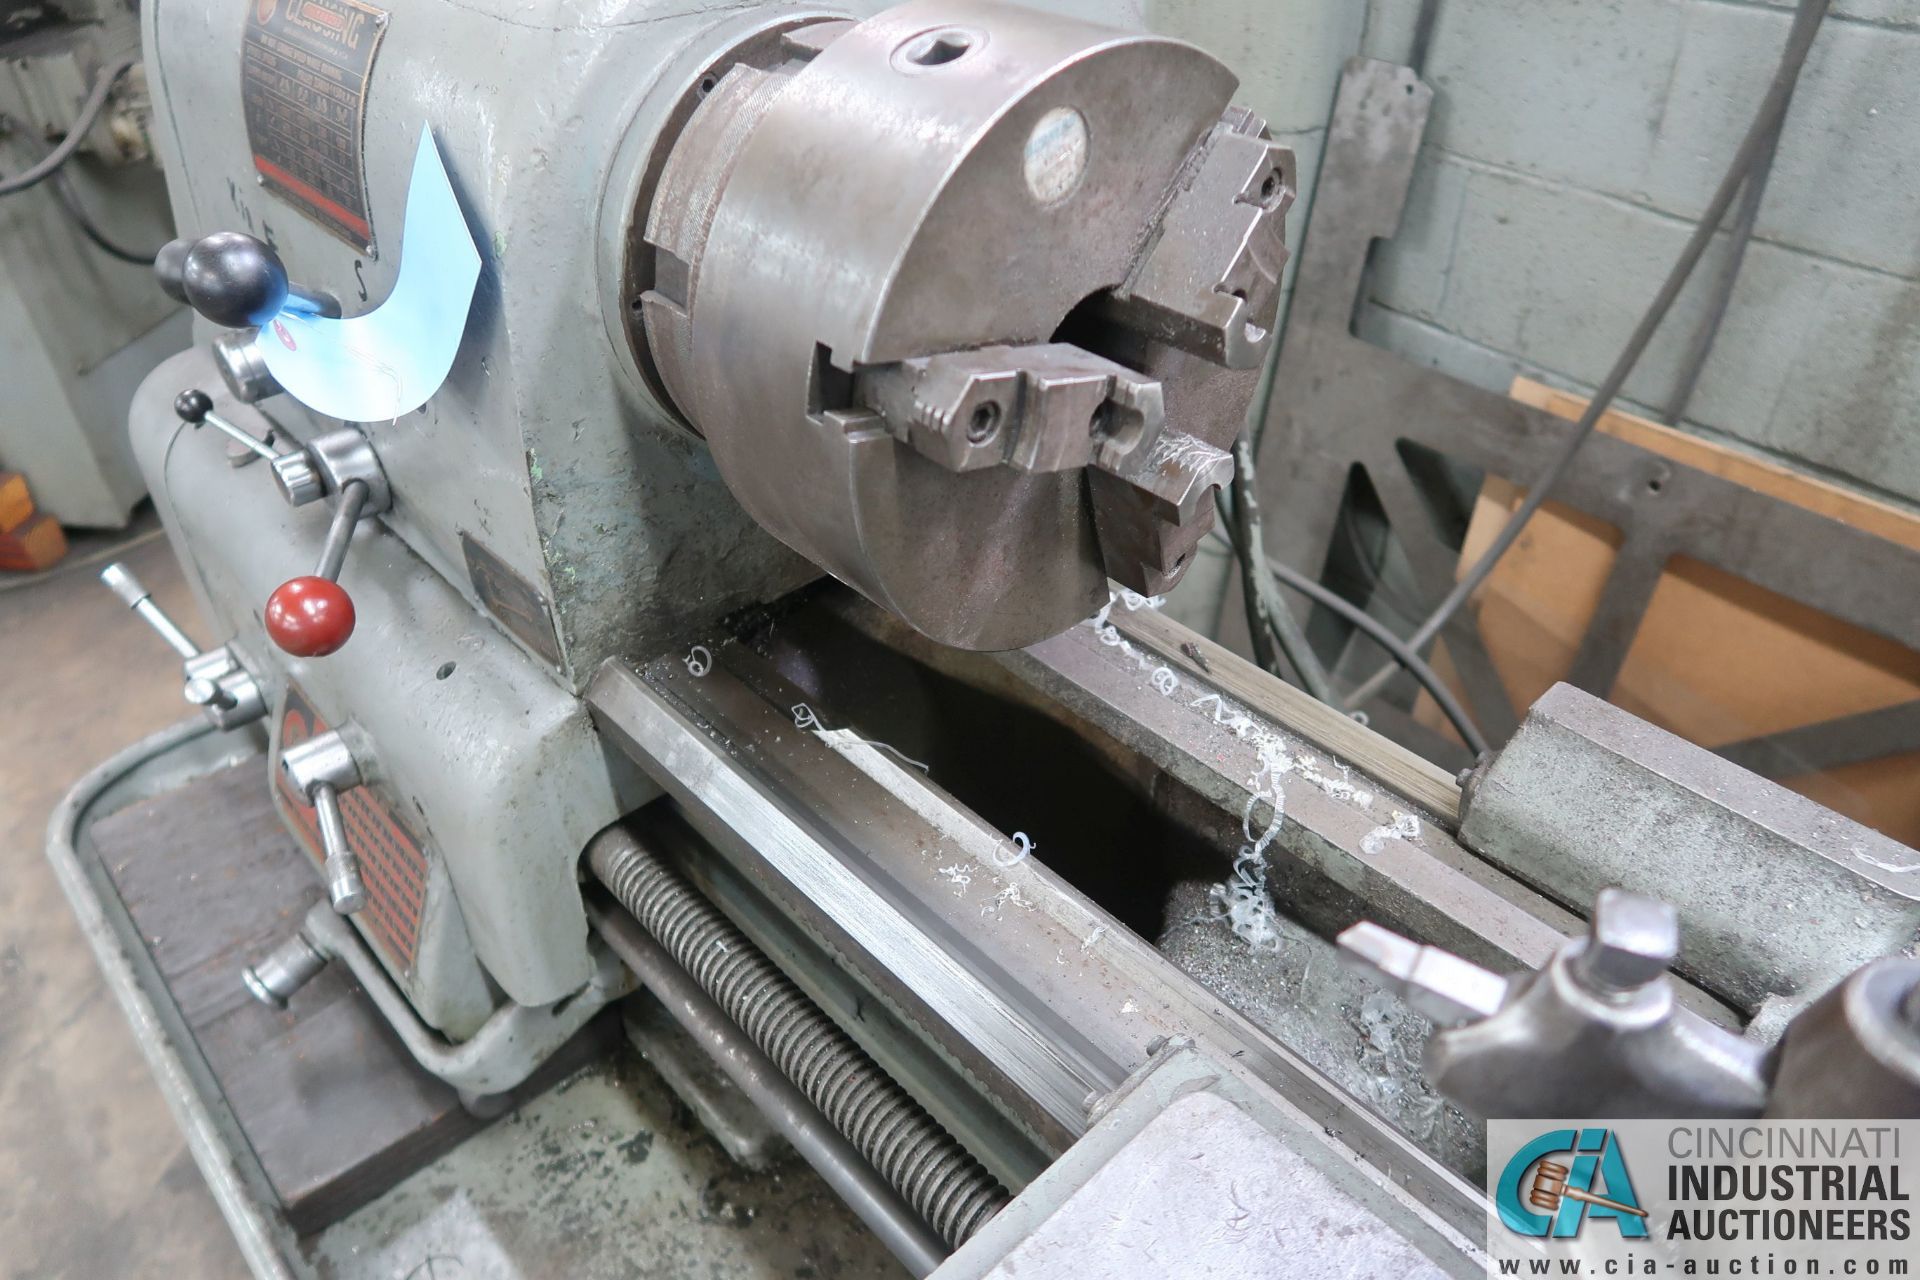 16" X 40" CLAUSING LATHE; S/N F4-60630, 37 - 1500 RPM, 9" 3-JAW CHUCK, TAILSTOCK, 1-1/4" SPINDLE - Image 4 of 10